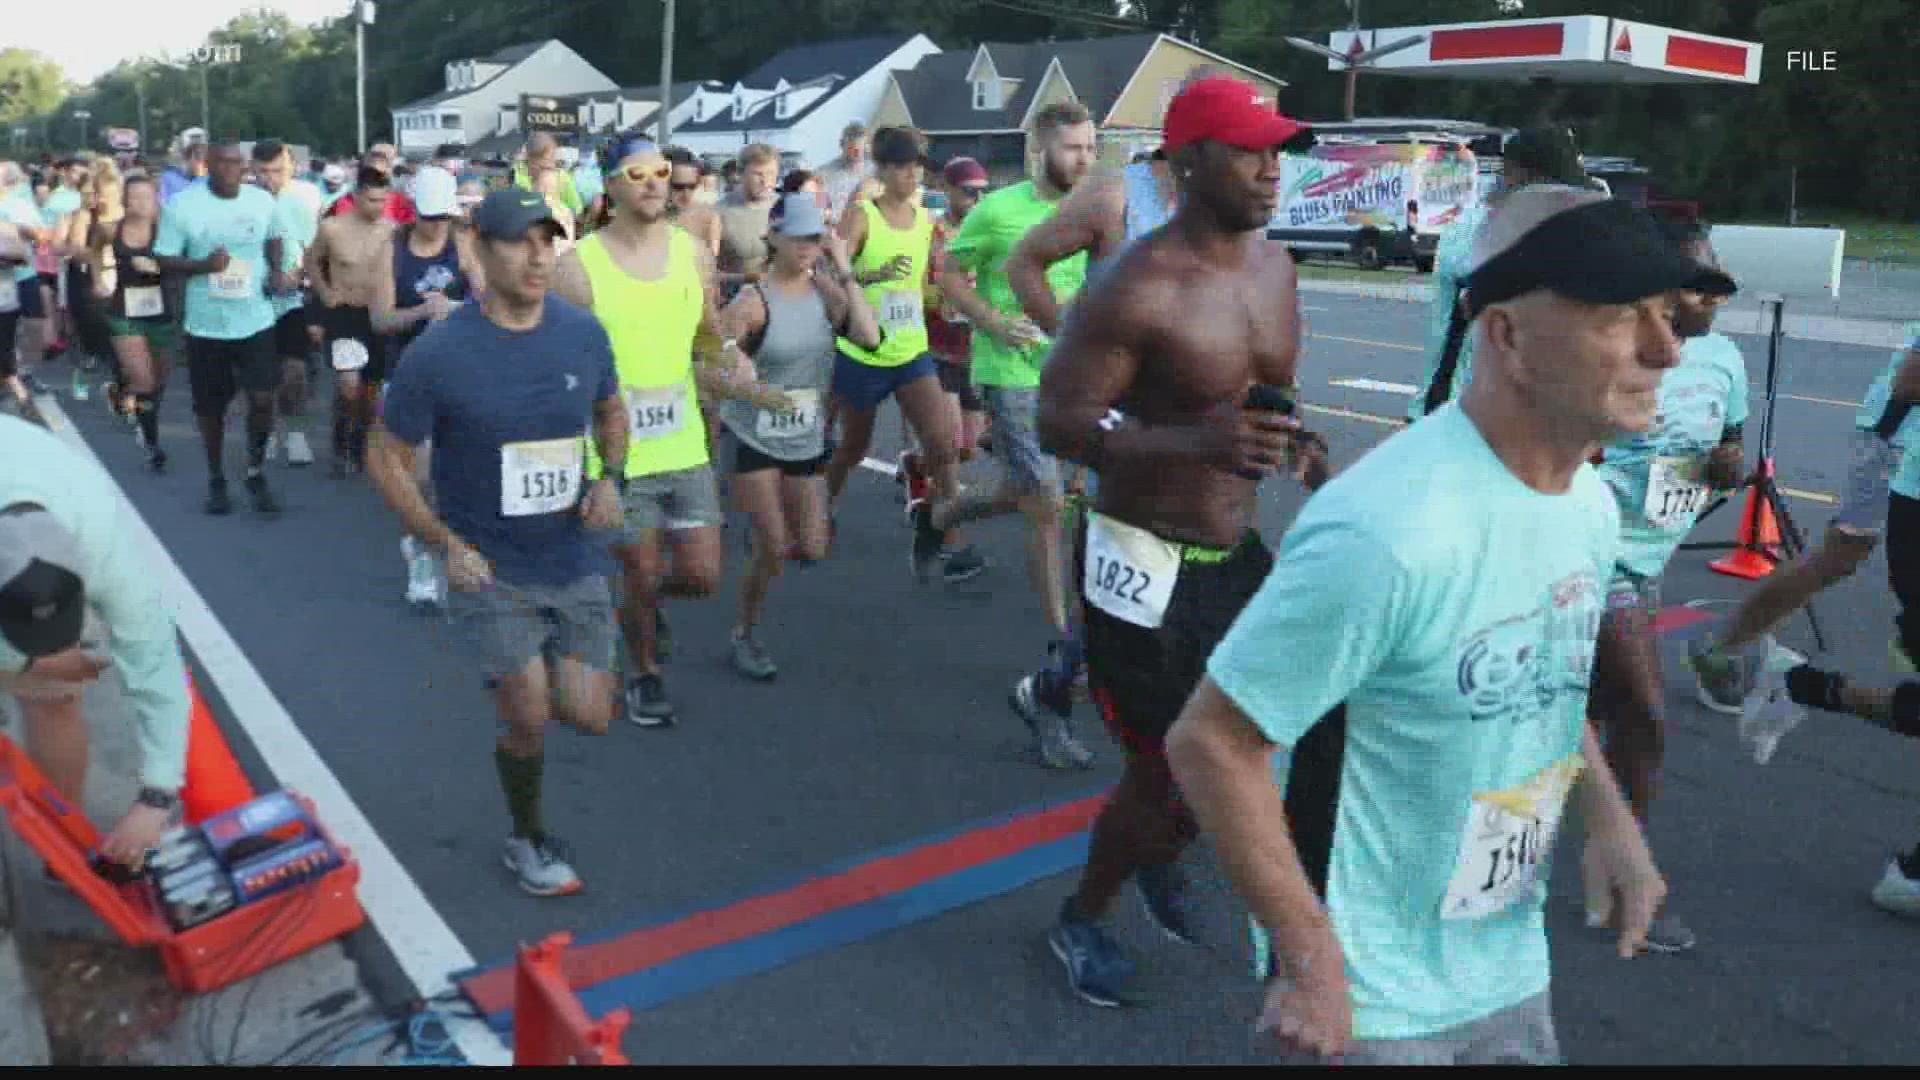 Over 1,100 people run in 44th Labor Day Road Race in Macon